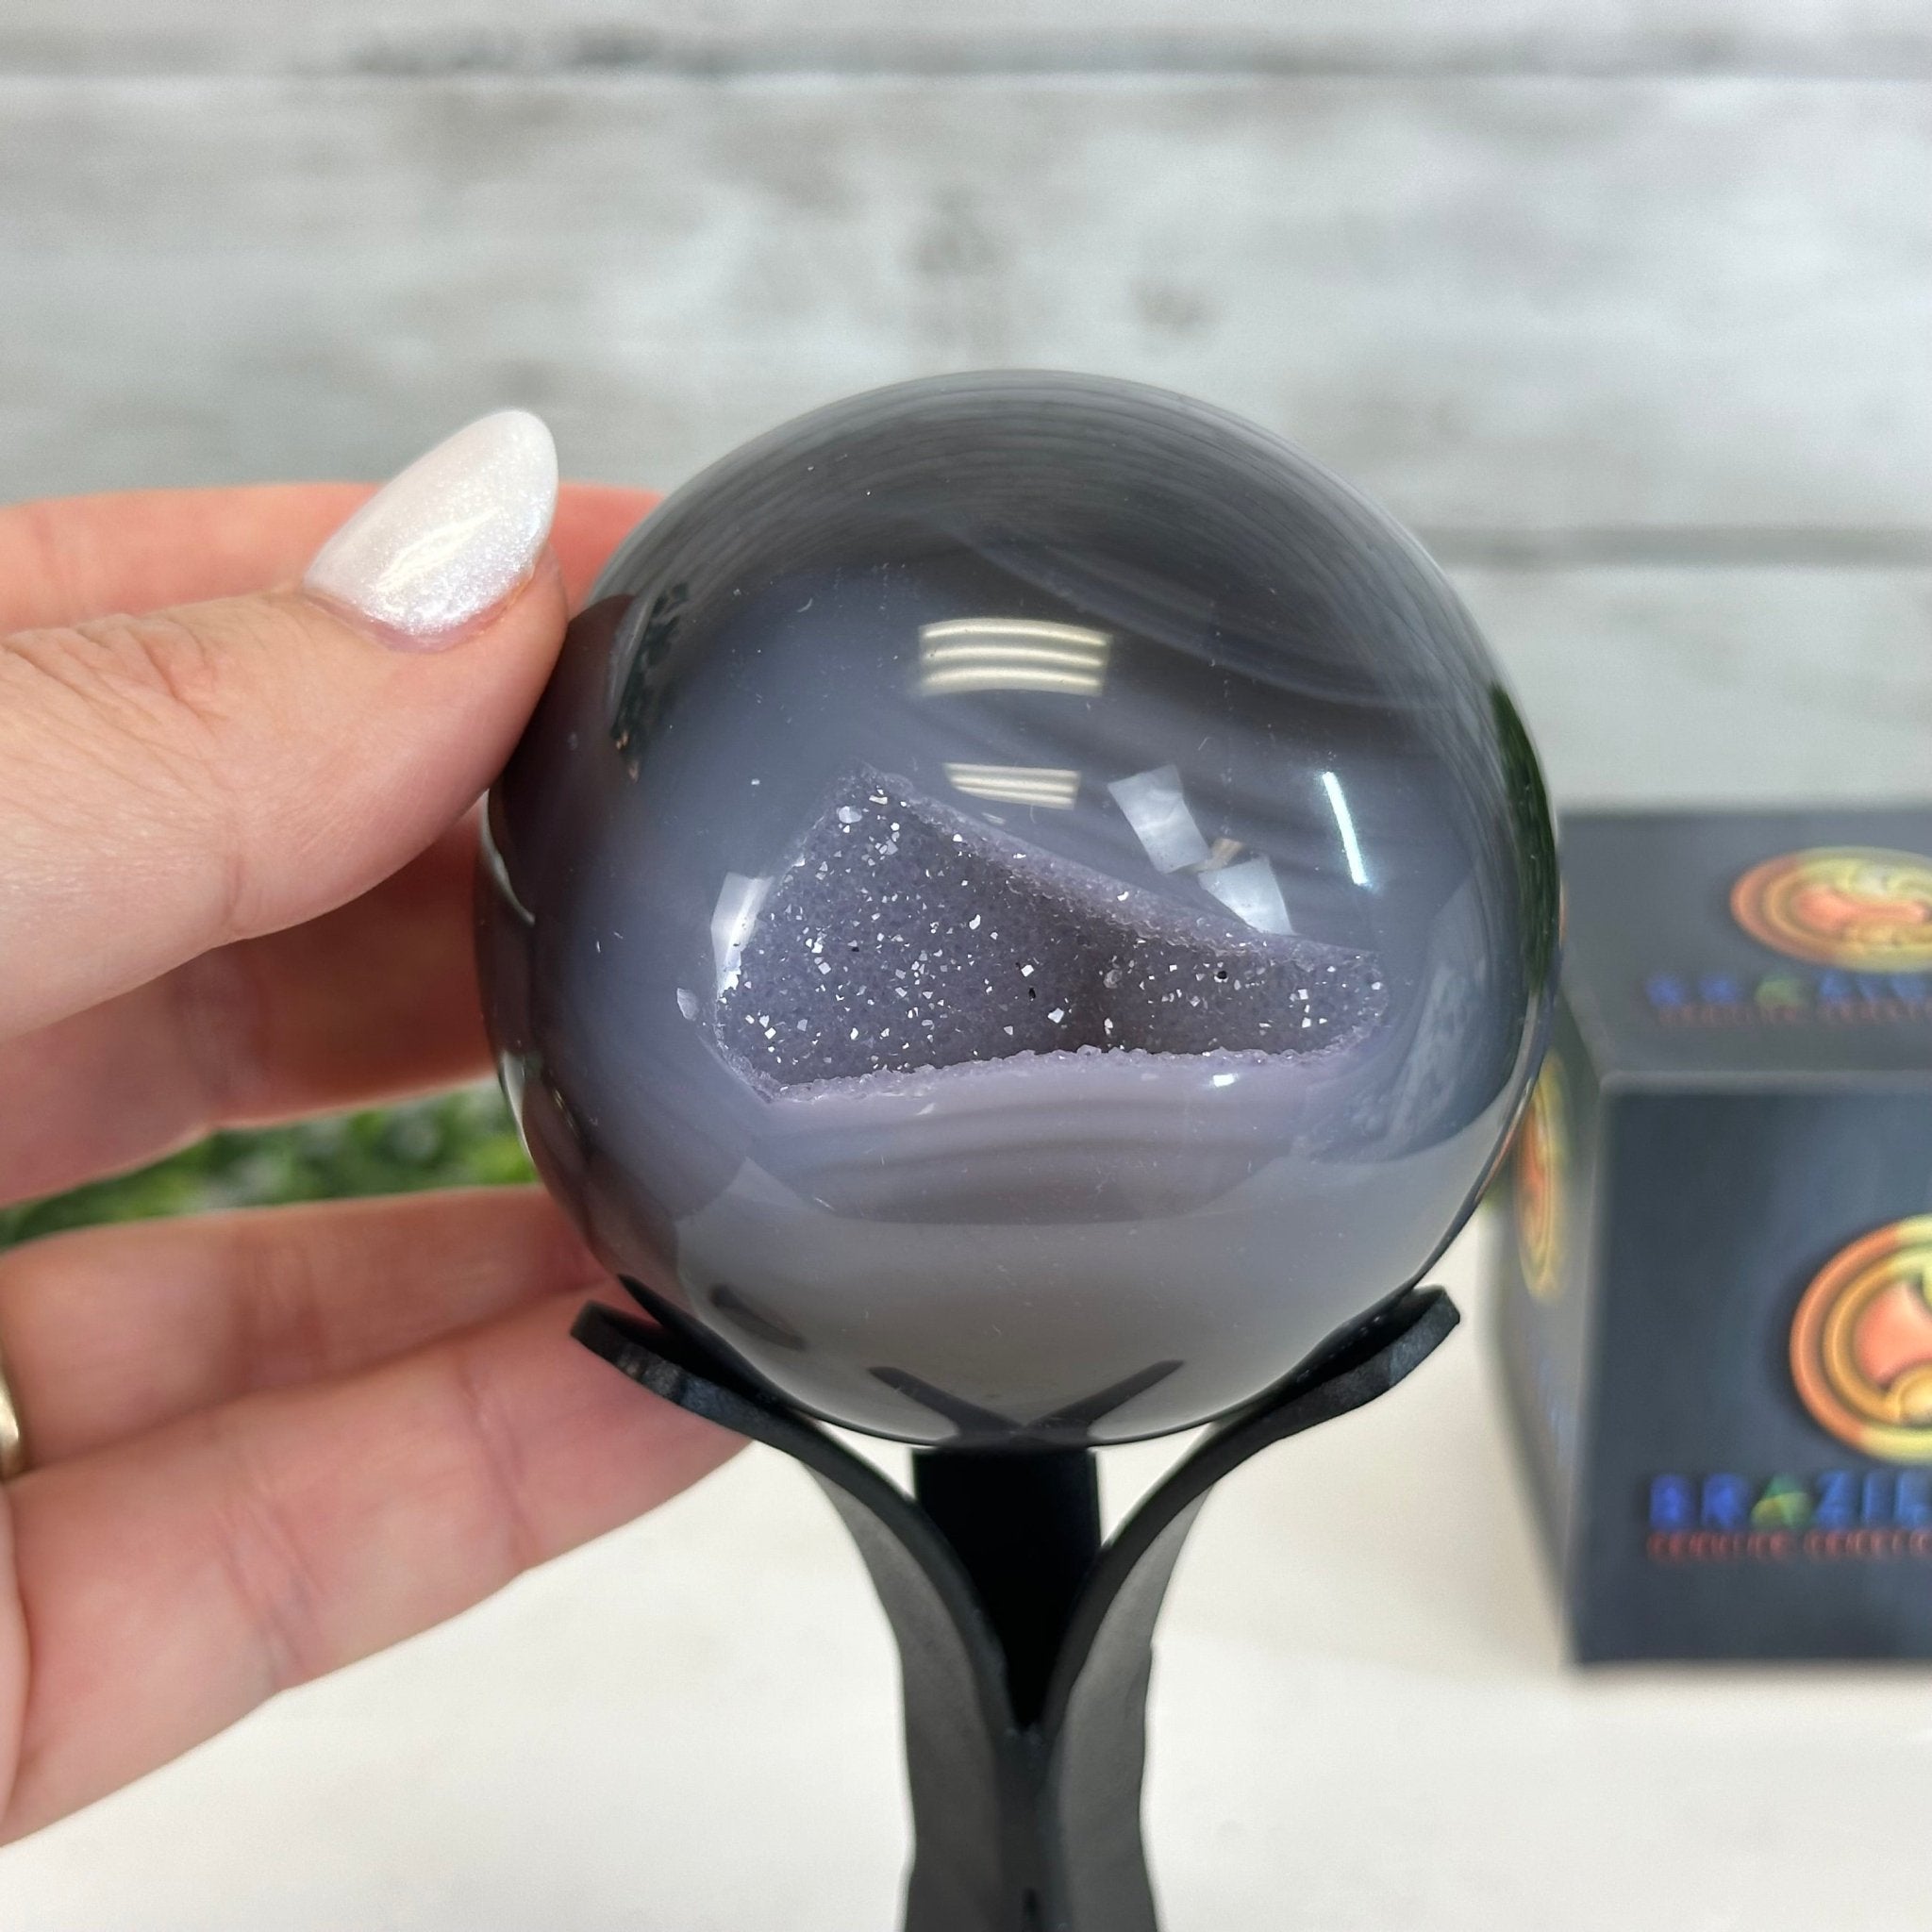 Druzy Agate Sphere on a Metal Stand, 0.9 lbs & 6.3" Tall #5634-0003 - Brazil GemsBrazil GemsDruzy Agate Sphere on a Metal Stand, 0.9 lbs & 6.3" Tall #5634-0003Spheres5634-0003